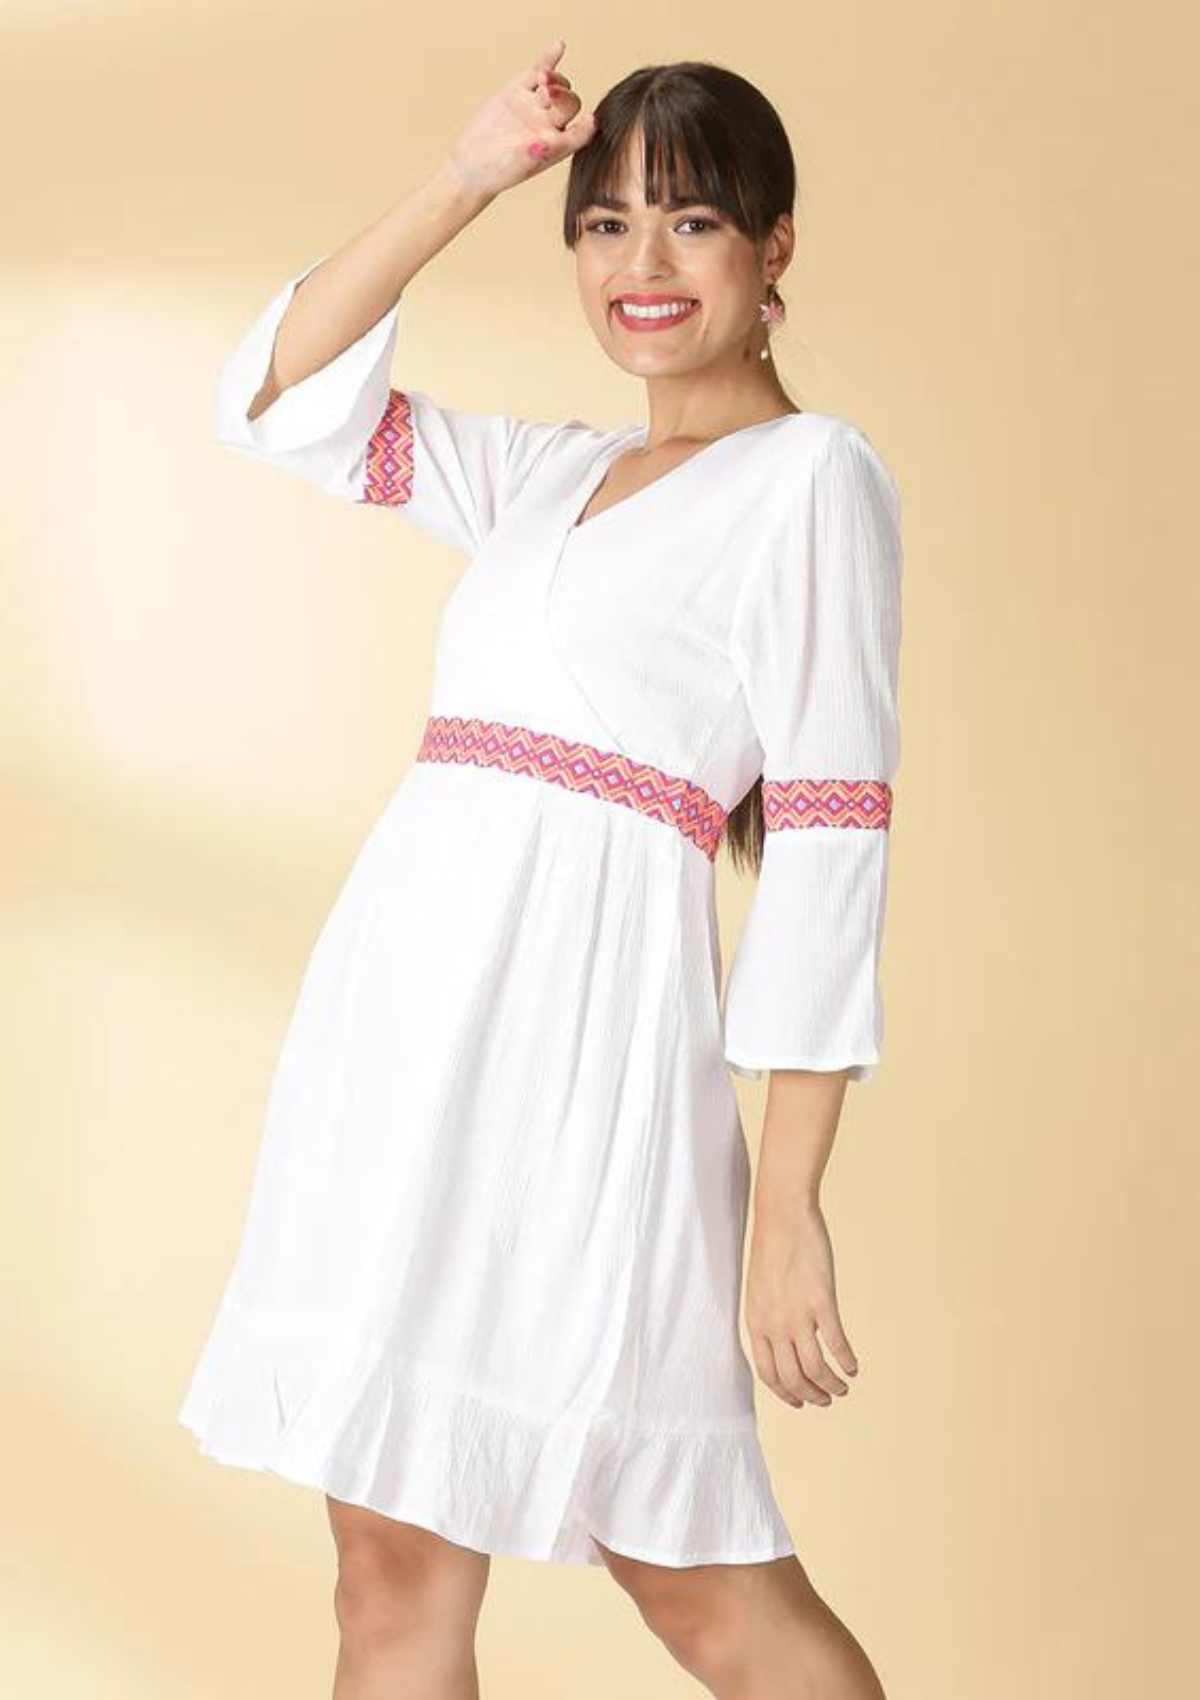 Buy Adhara Sassy White Dress With Embroidery Online | IshqMe